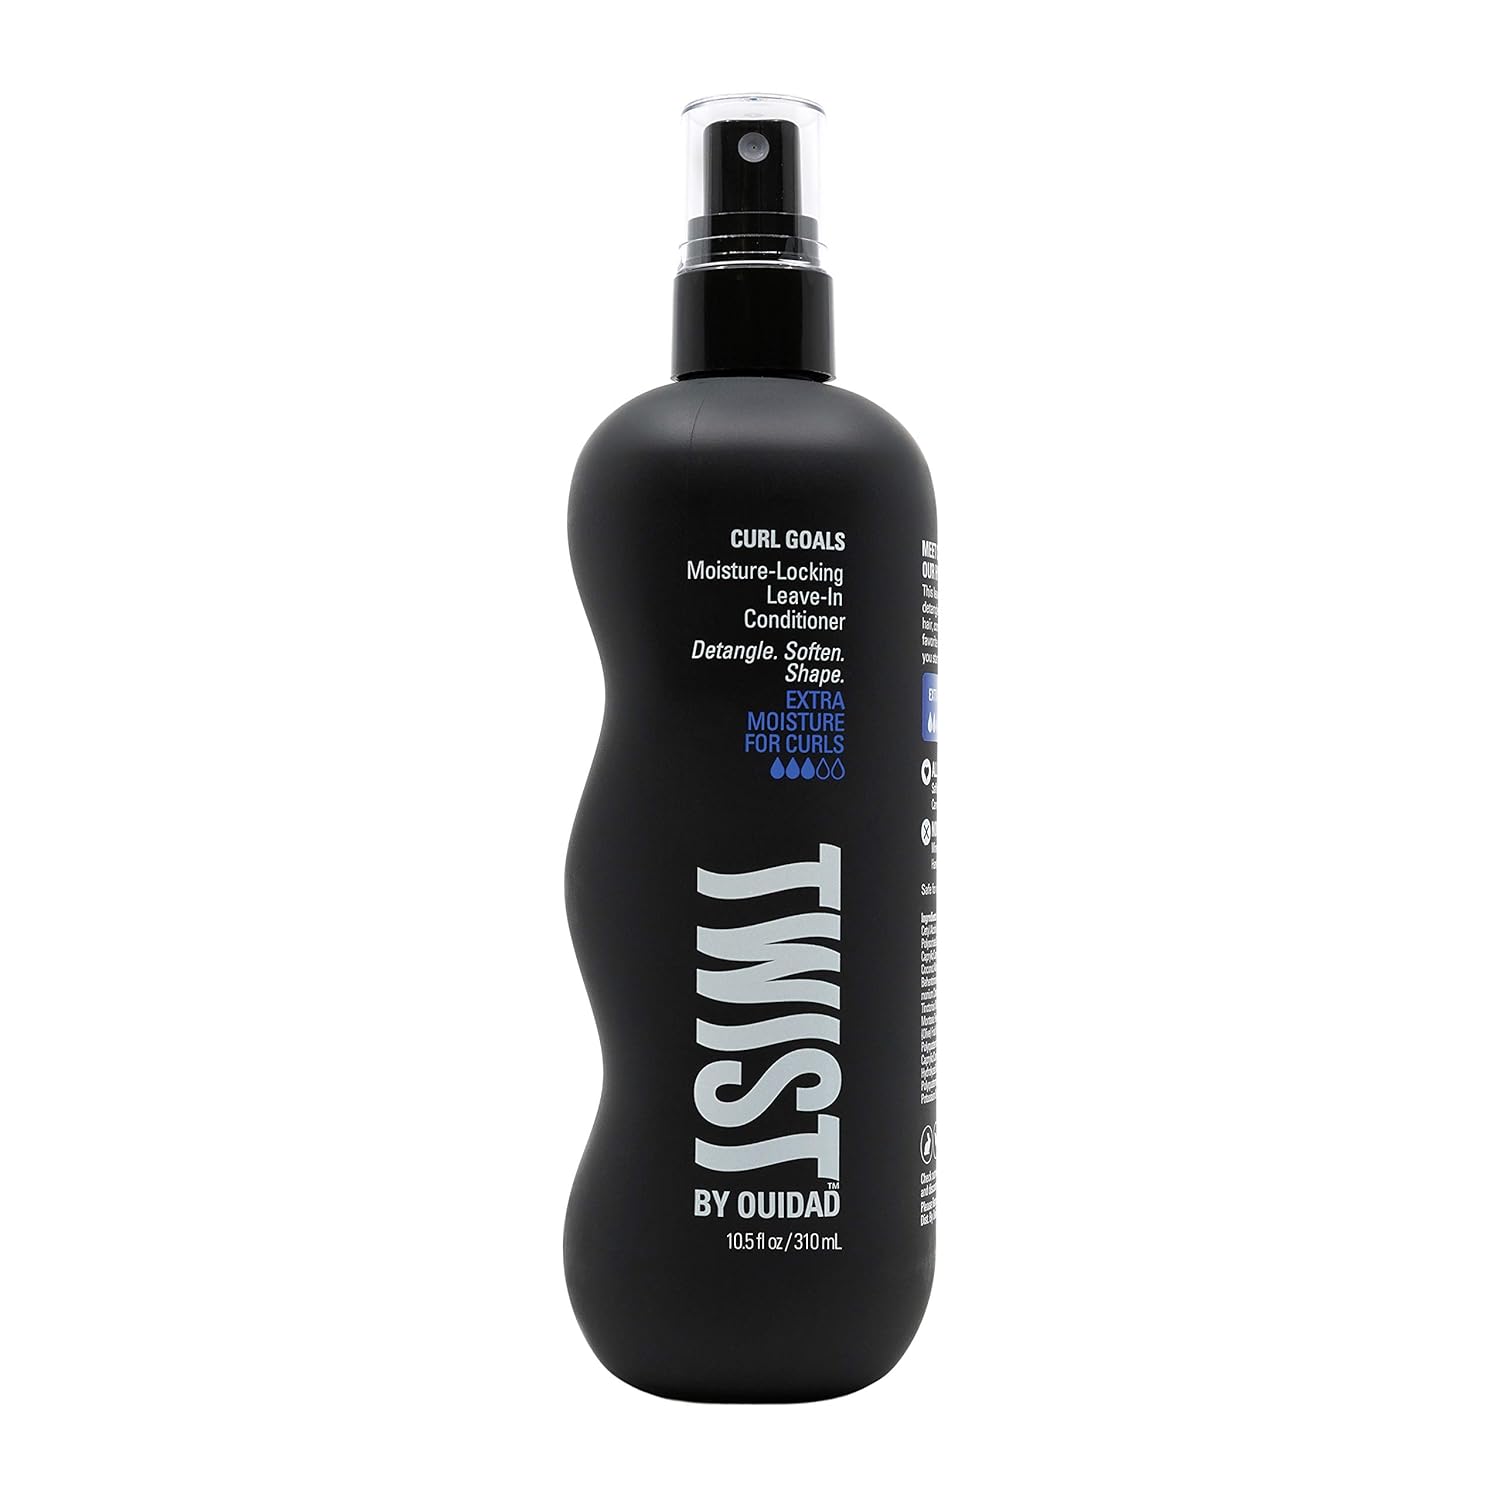 TWIST Curl Goals Moisture-locking Leave-in Conditioner, 10.5 ounces - Click Image to Close